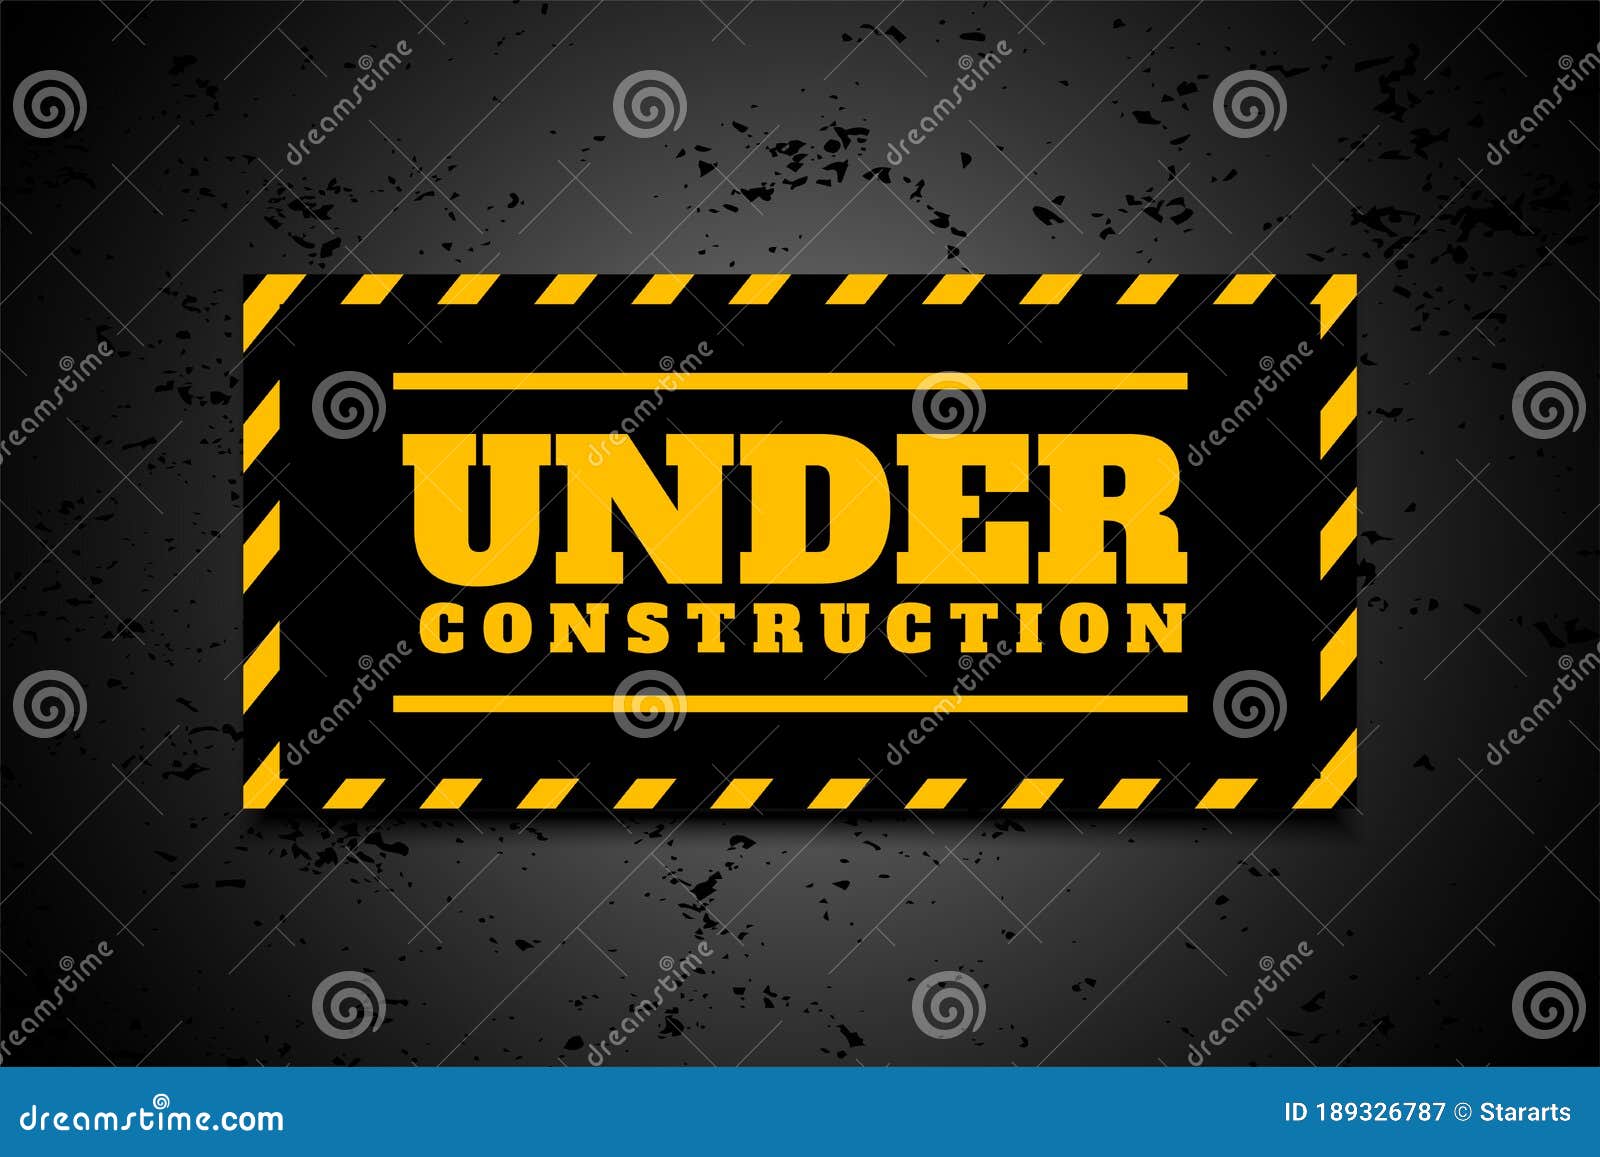 Under Construction Industrial Background in Yellow Black Stripes Stock ...